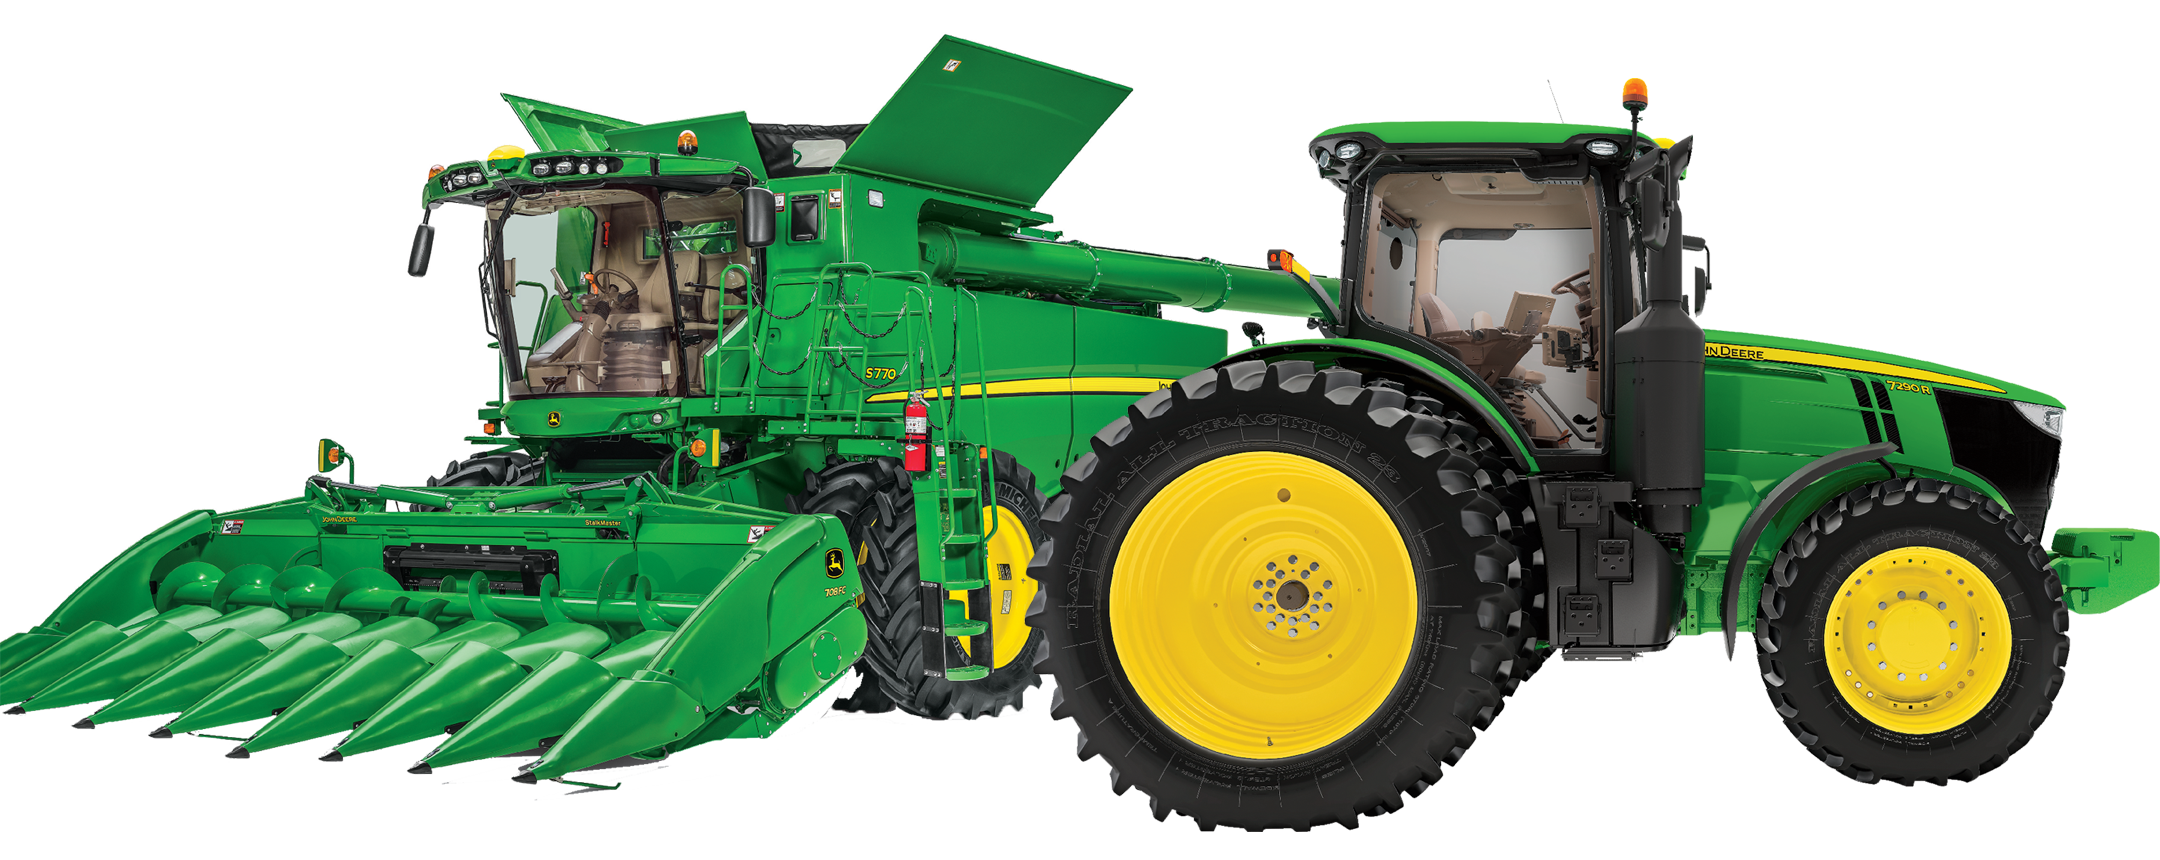 Shop pre-owned agricultural equipment in Flint Equipment